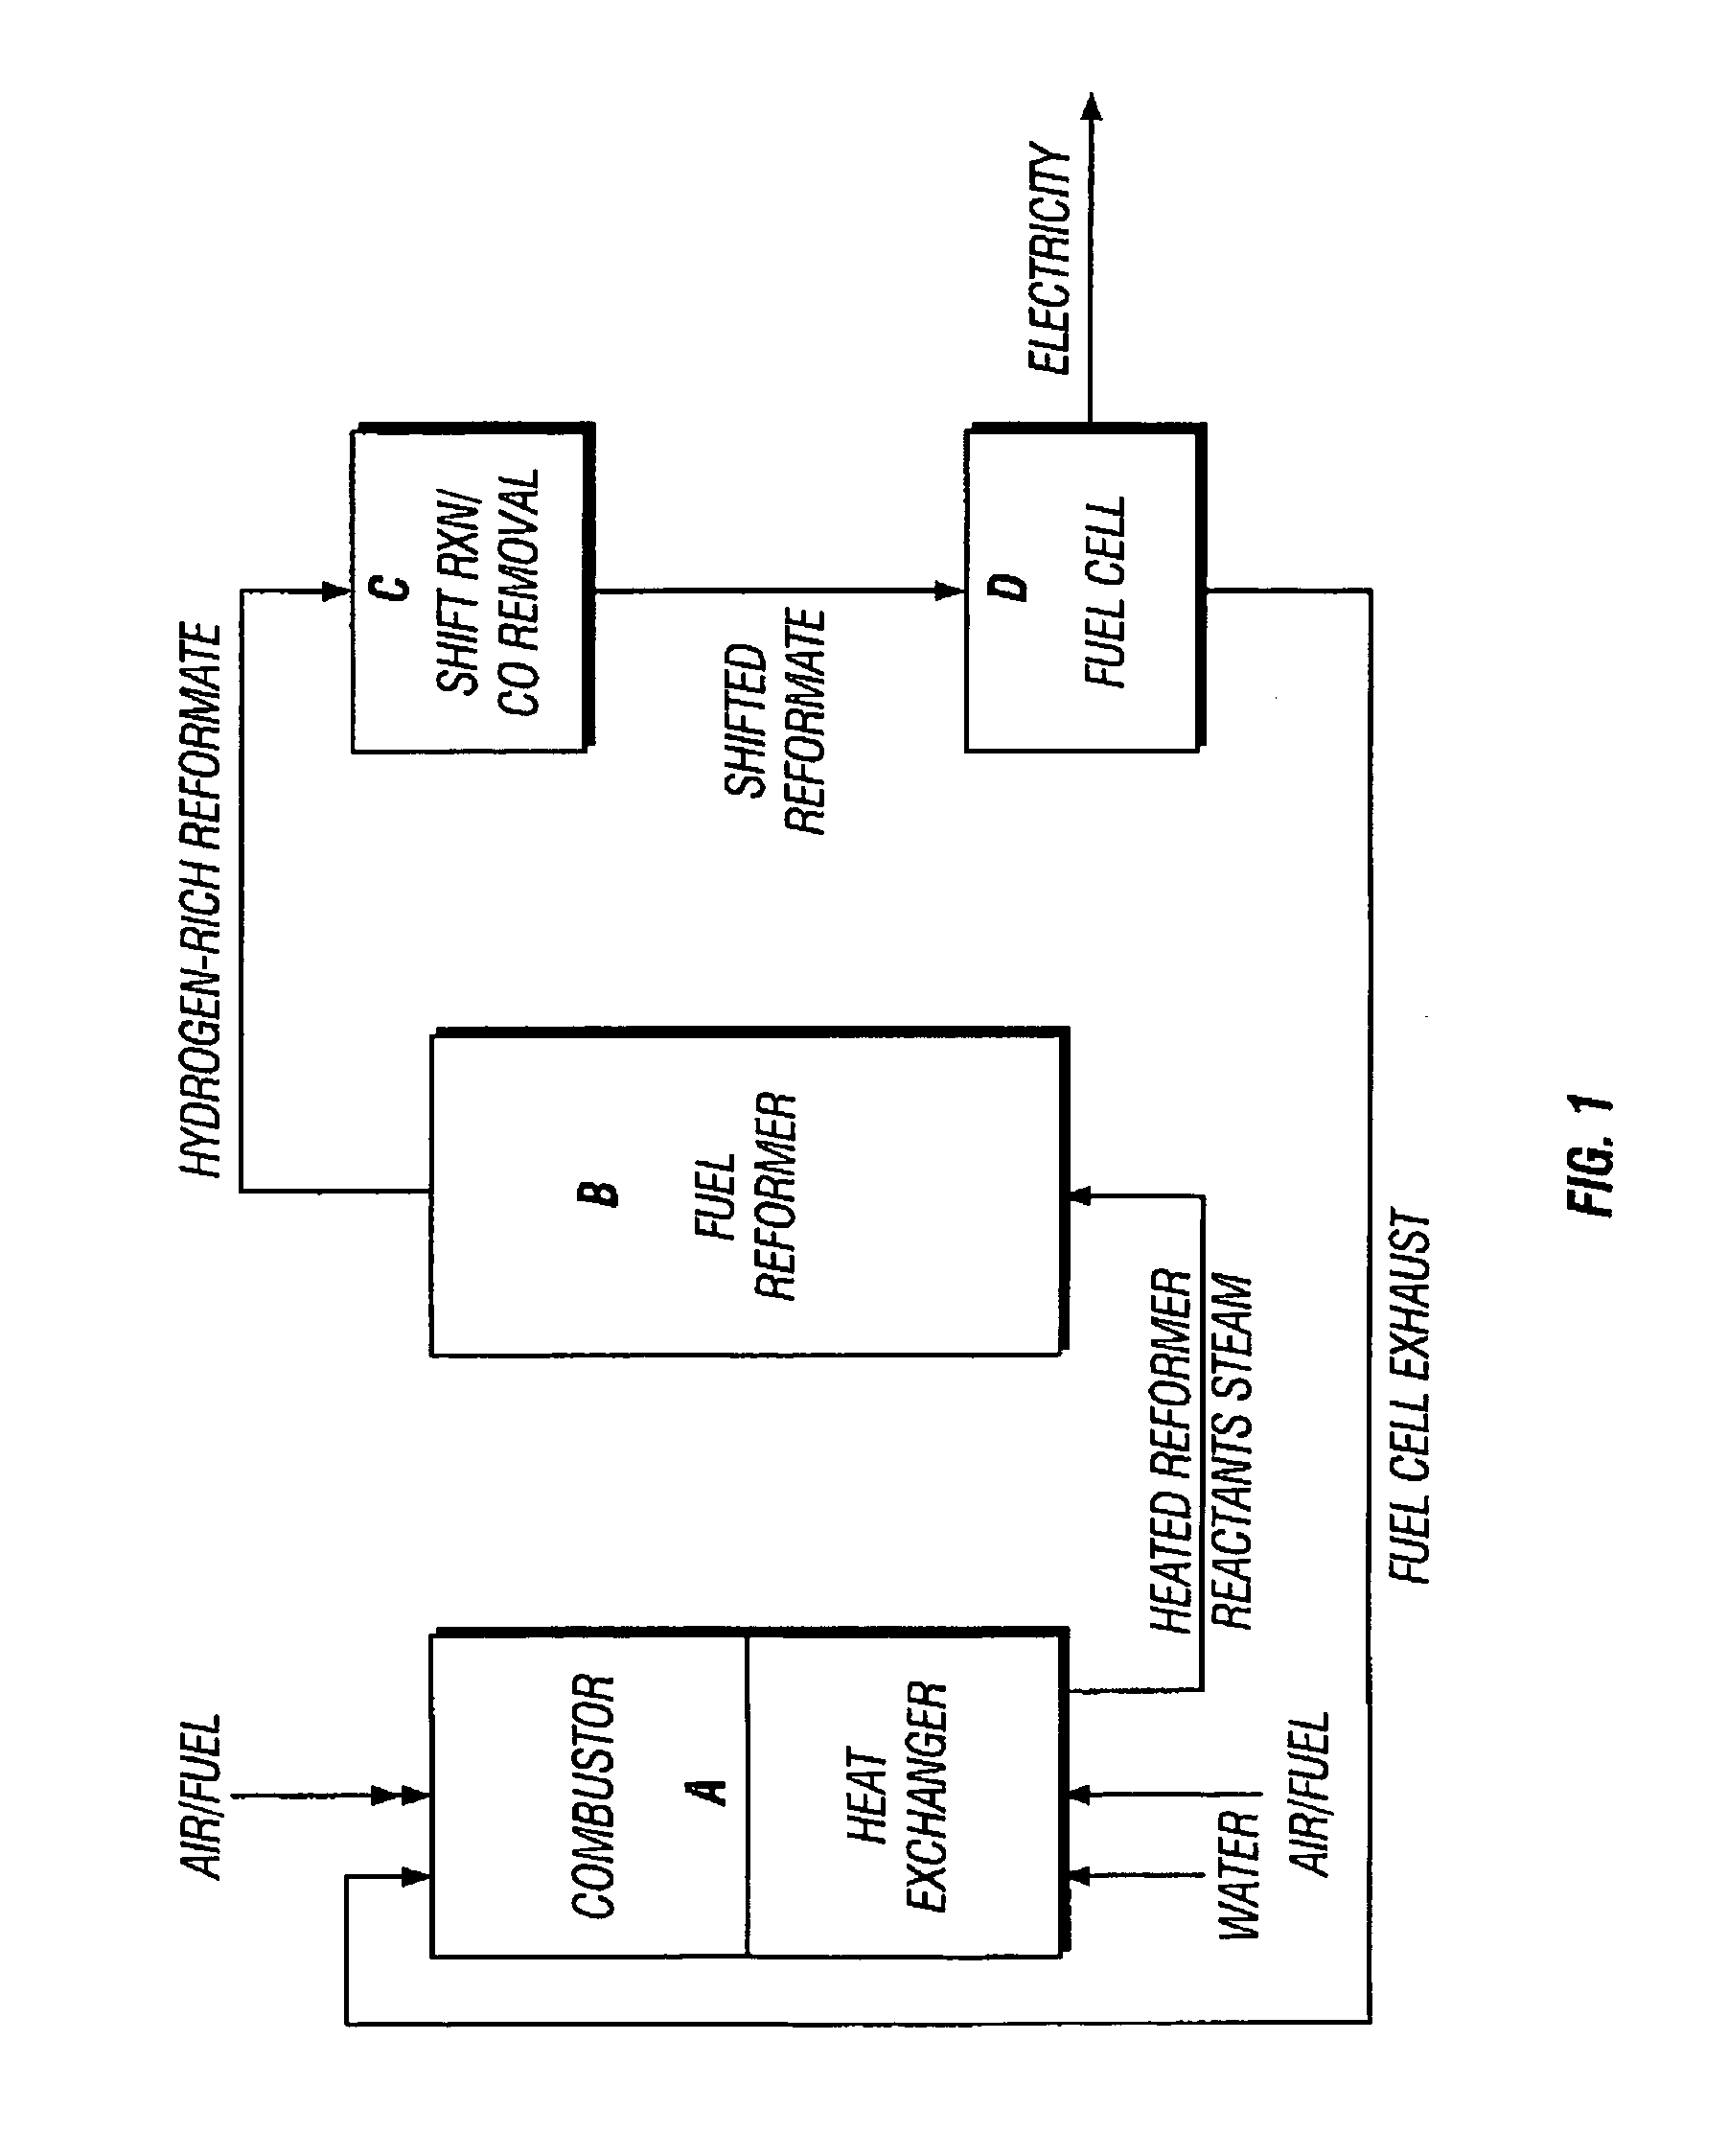 Method and apparatus for rapid heating of fuel reforming reactants